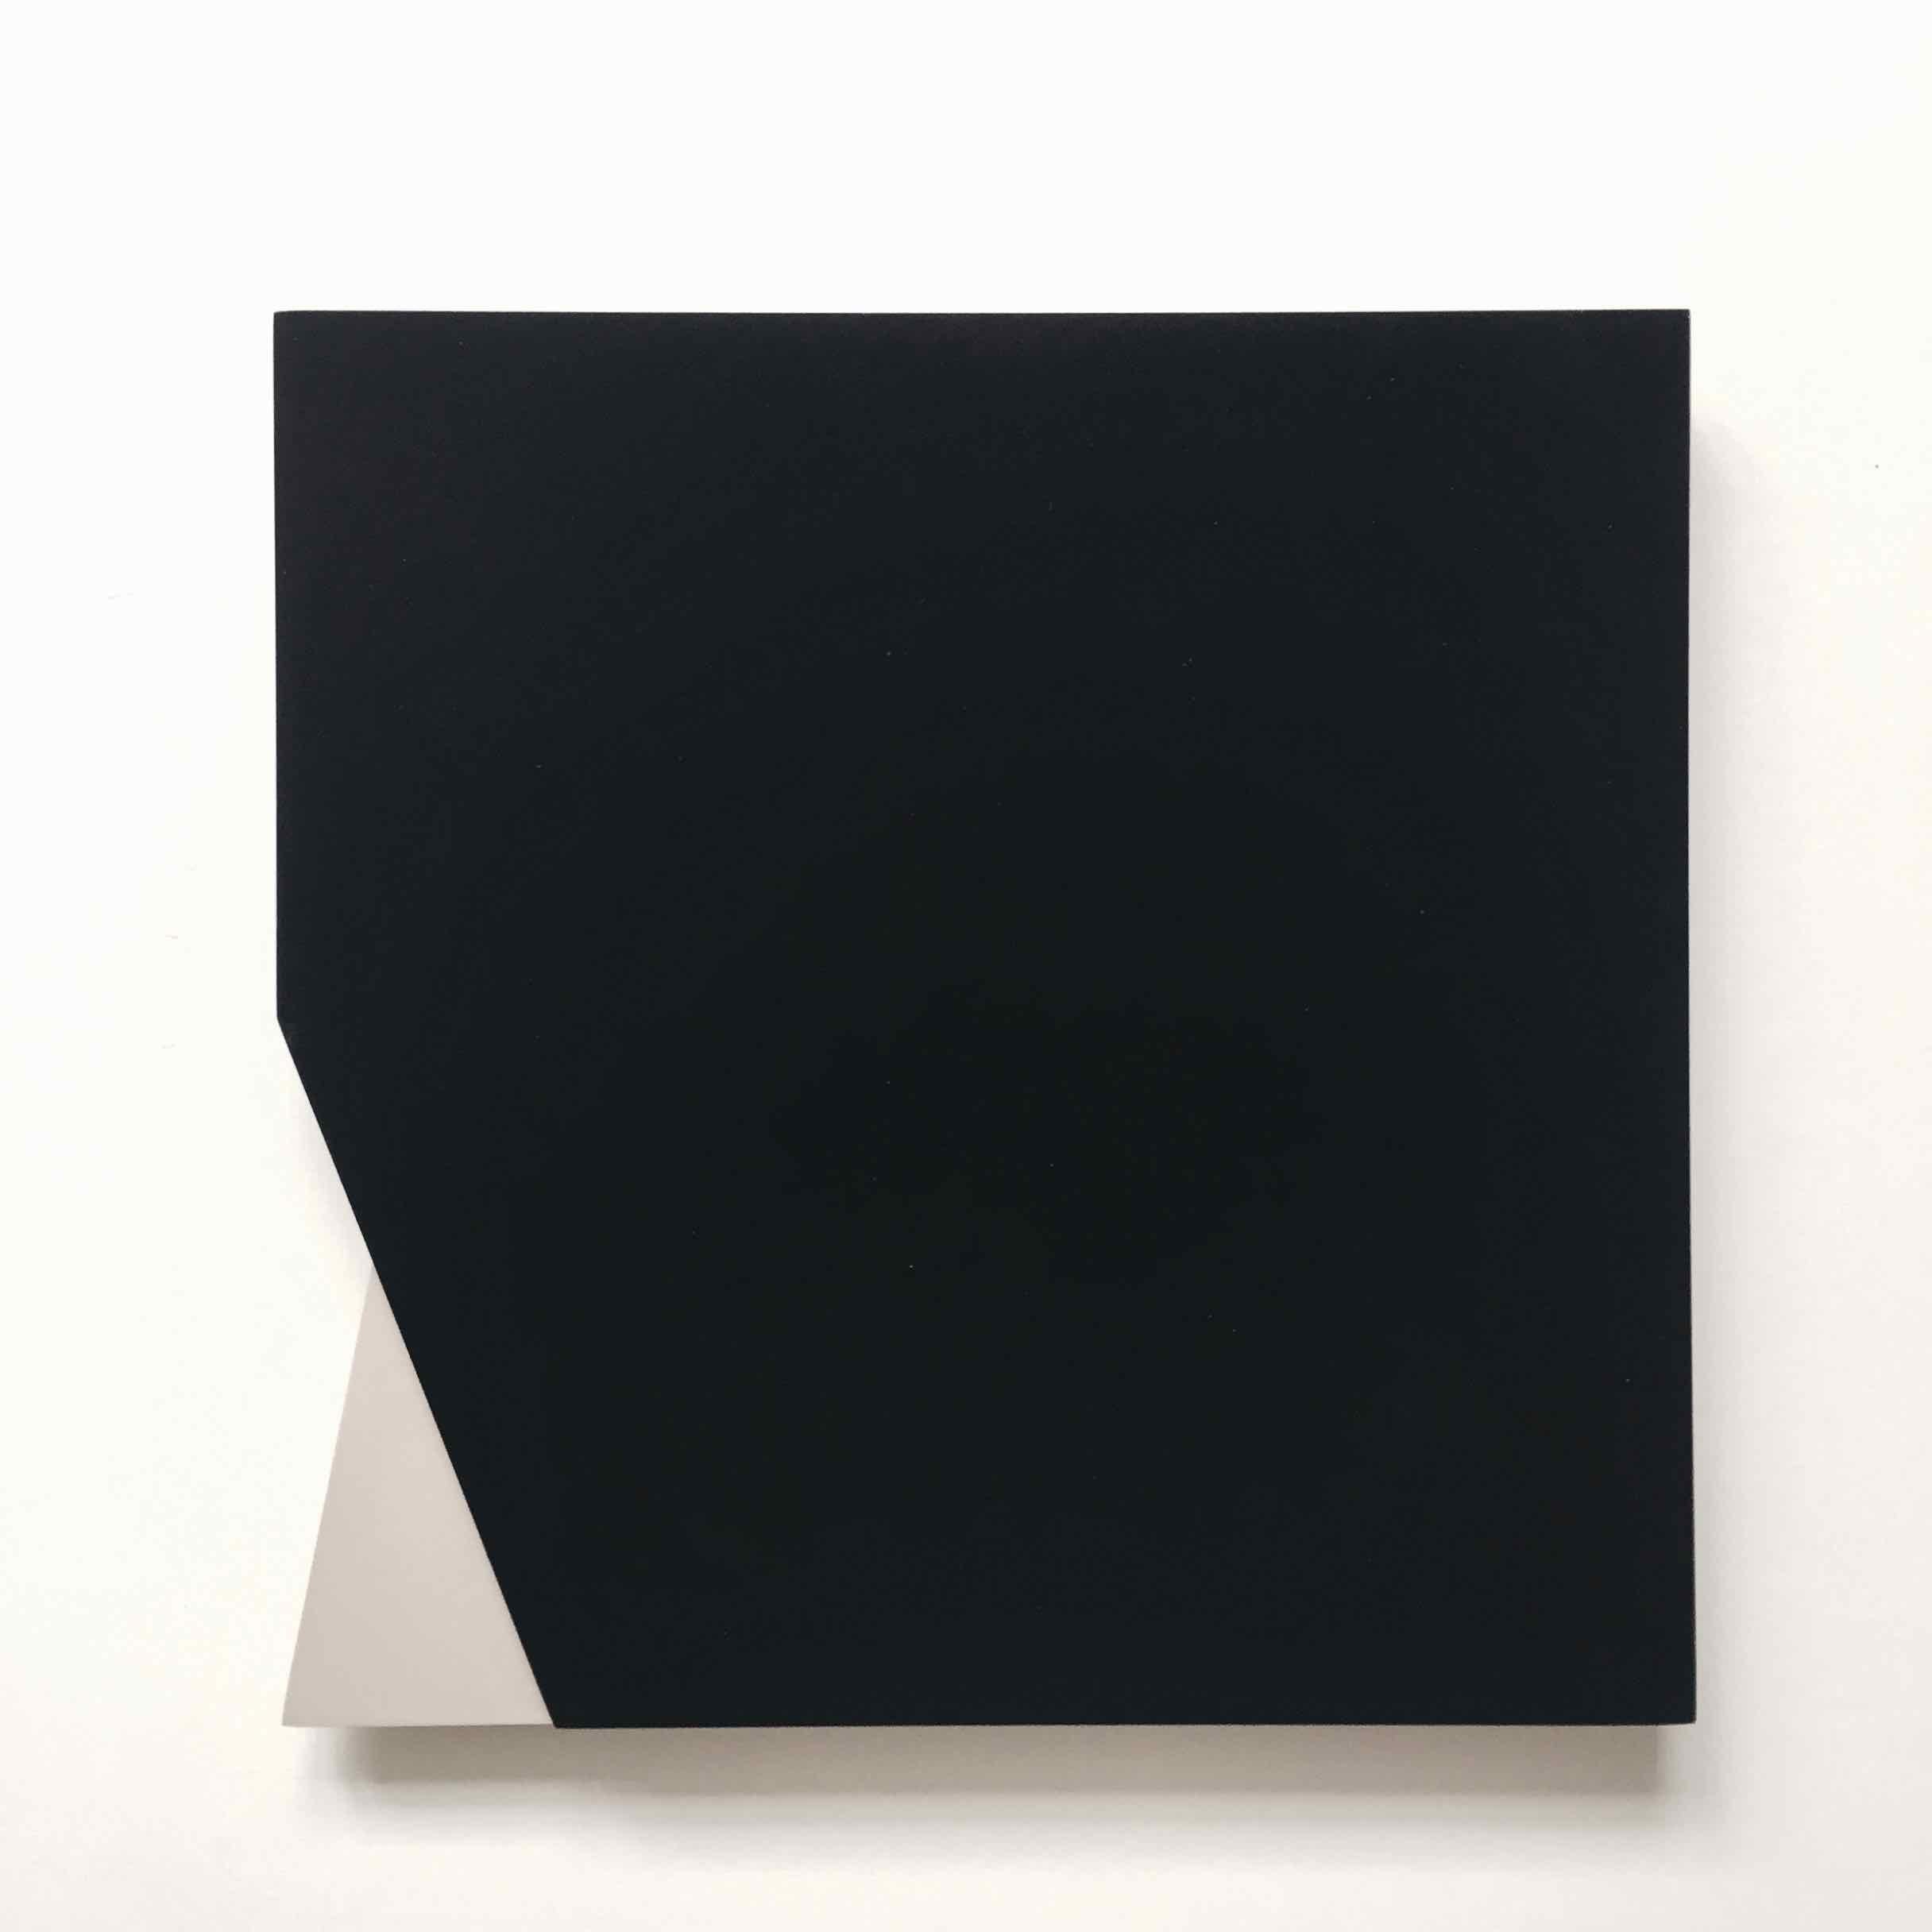 'Cut-out 20': Set of Four Minimal Hard Edge Abstract Paintings - Hard-Edge Sculpture by Laura Jane Scott